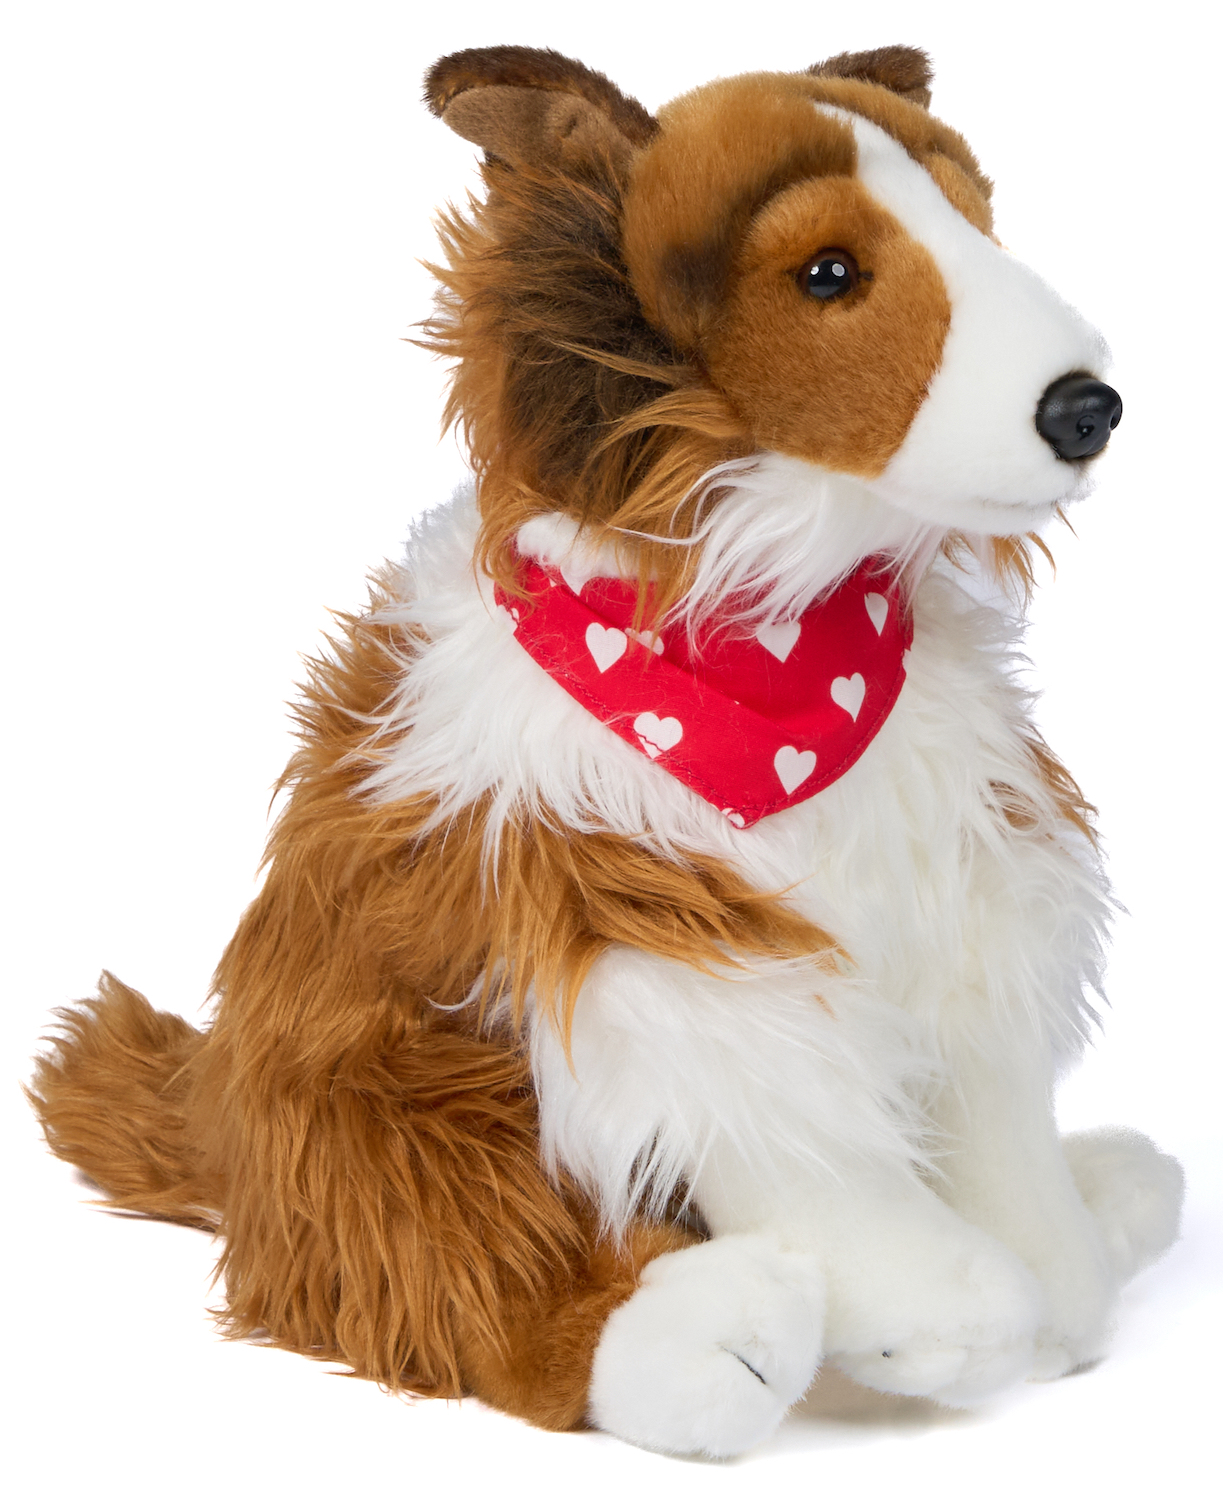 Long-haired collie with scarf "❤️" - 27 cm (height)